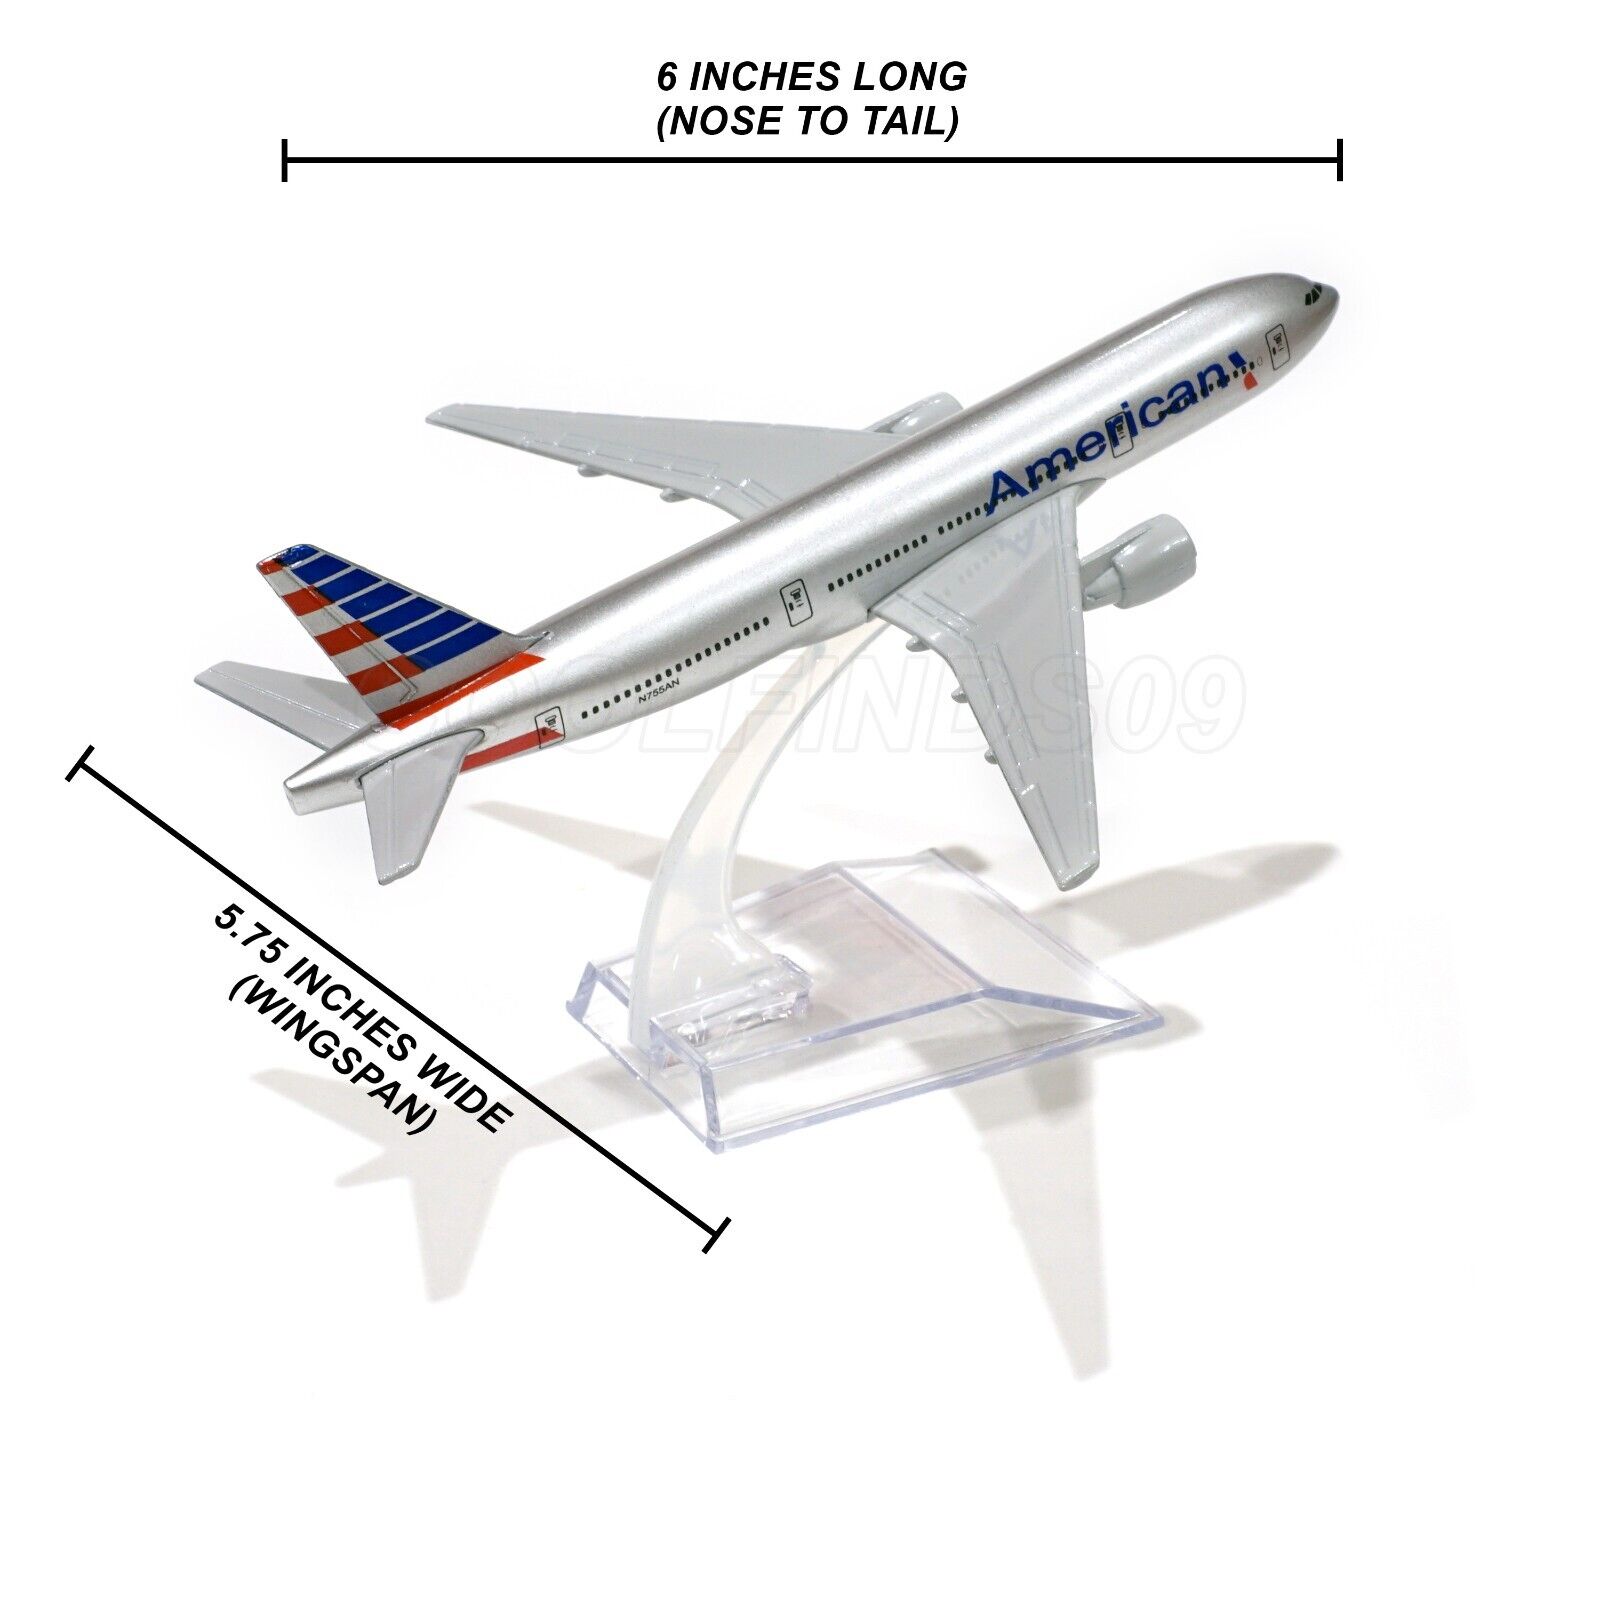 American Airlines Die-Cast Model Plane Boeing B777 Kit HPM16-104 with Stand